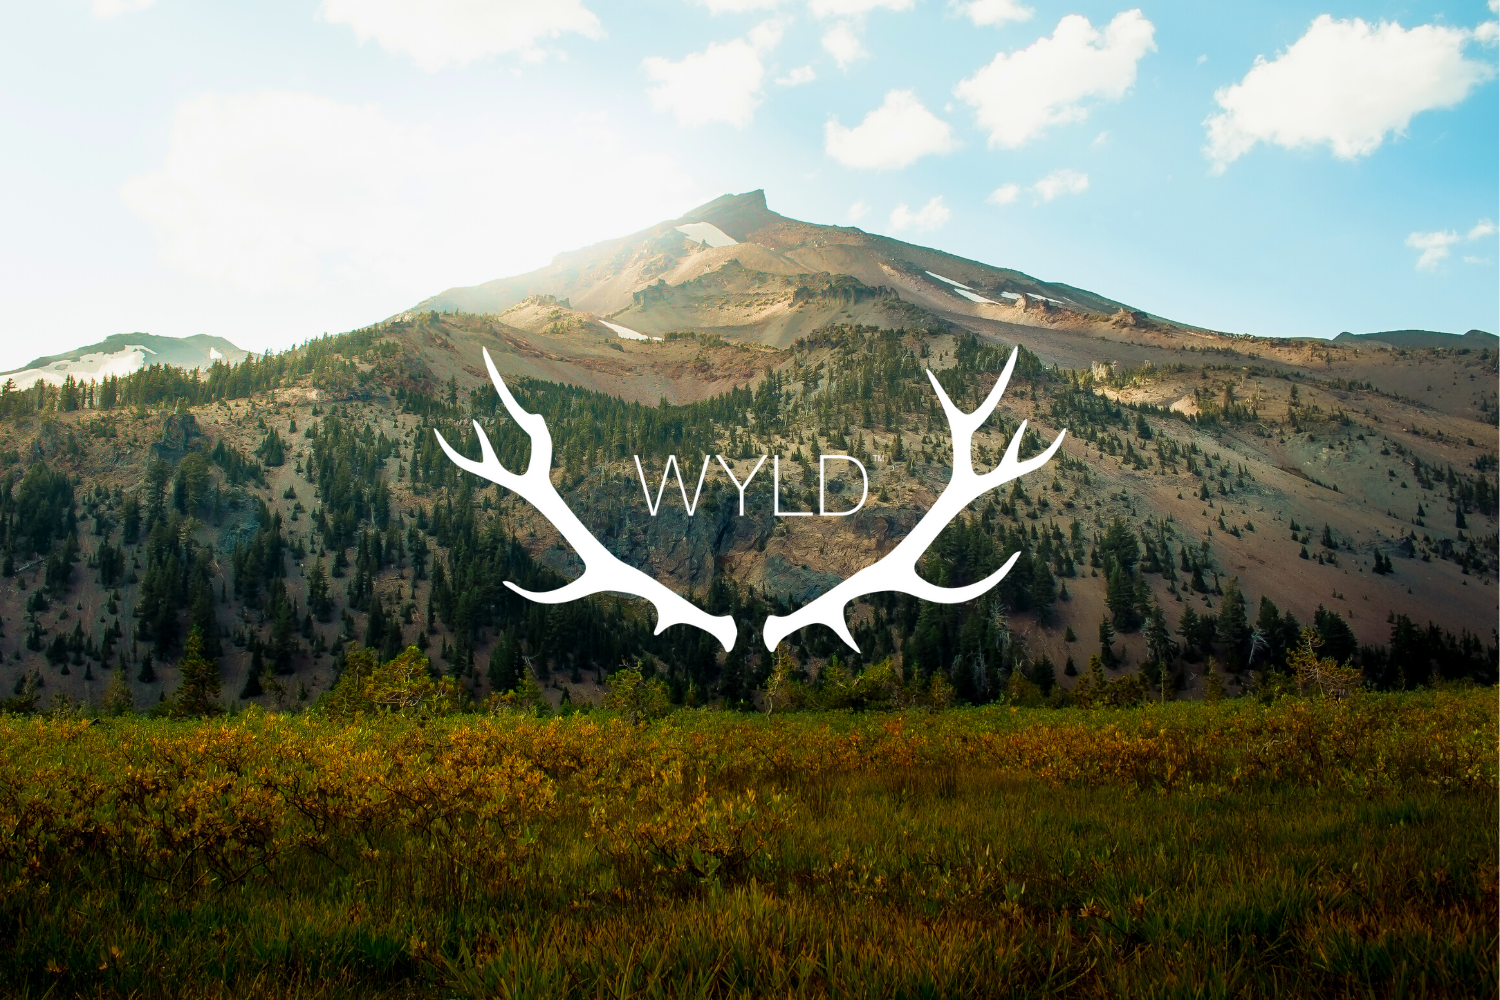 WYLD: humble beginnings to an international leader in the cannabis industry.